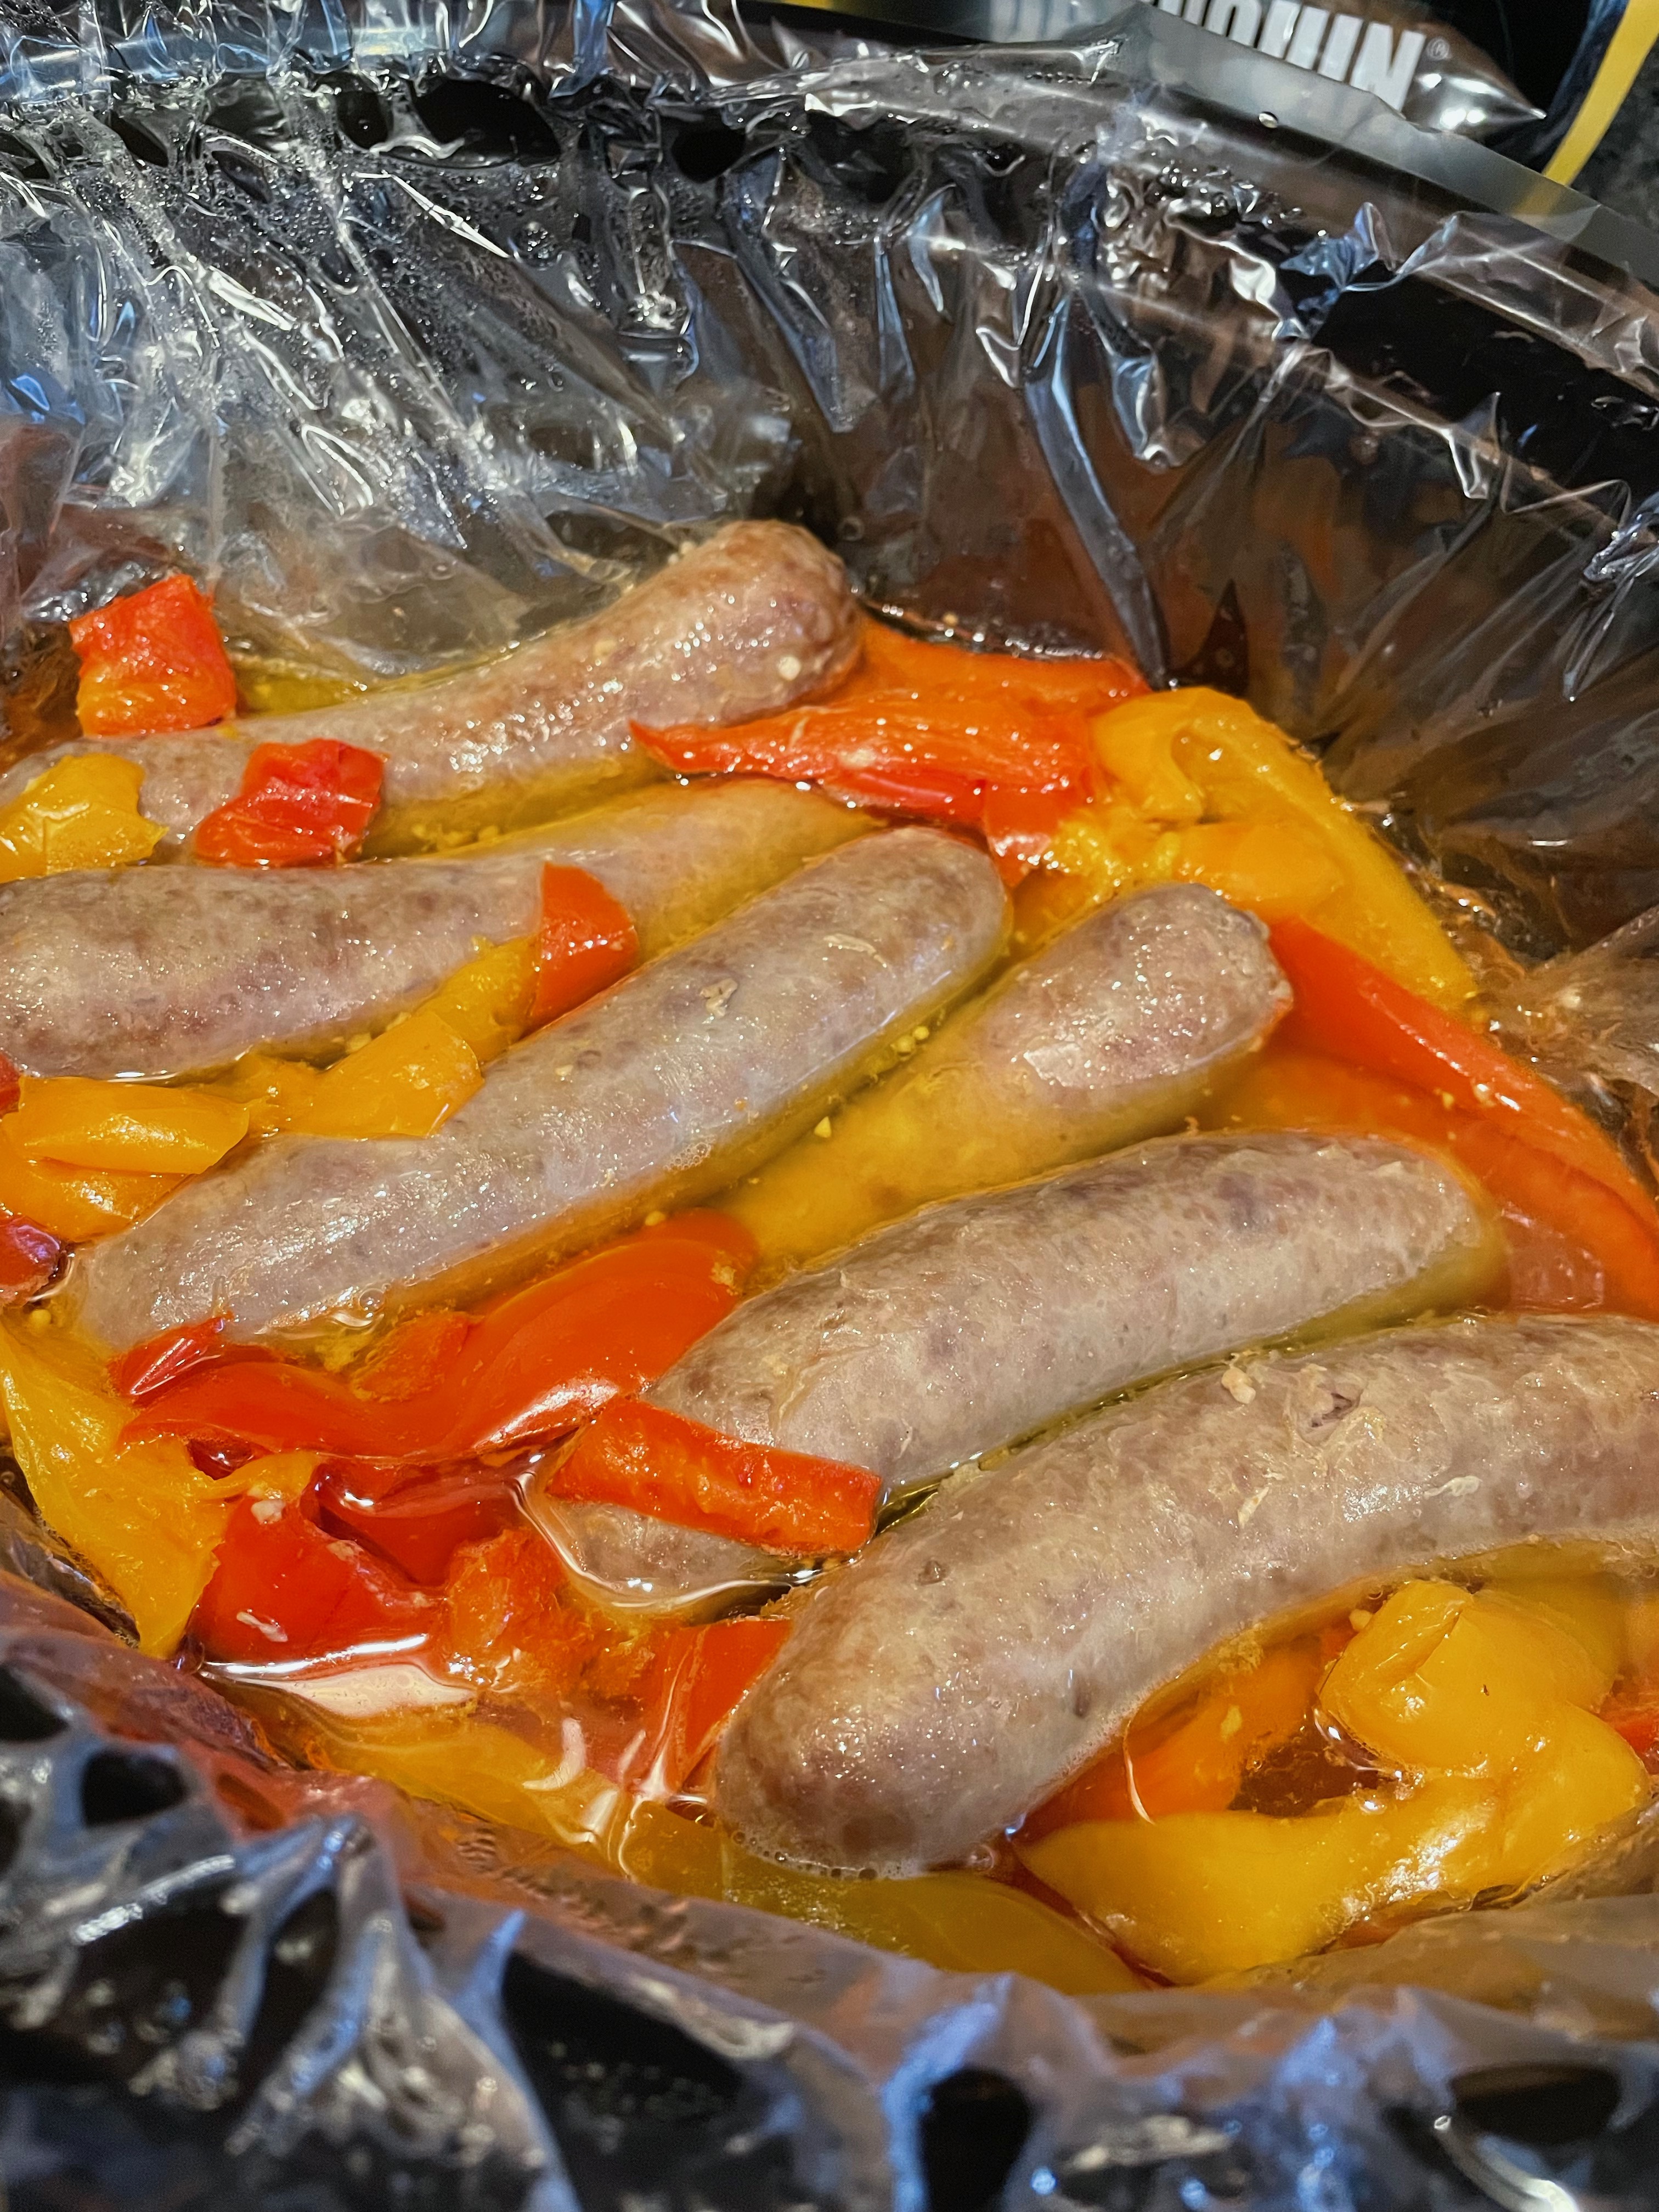 Slow Cooker Brats with Onions and Peppers - Cooking With Carlee